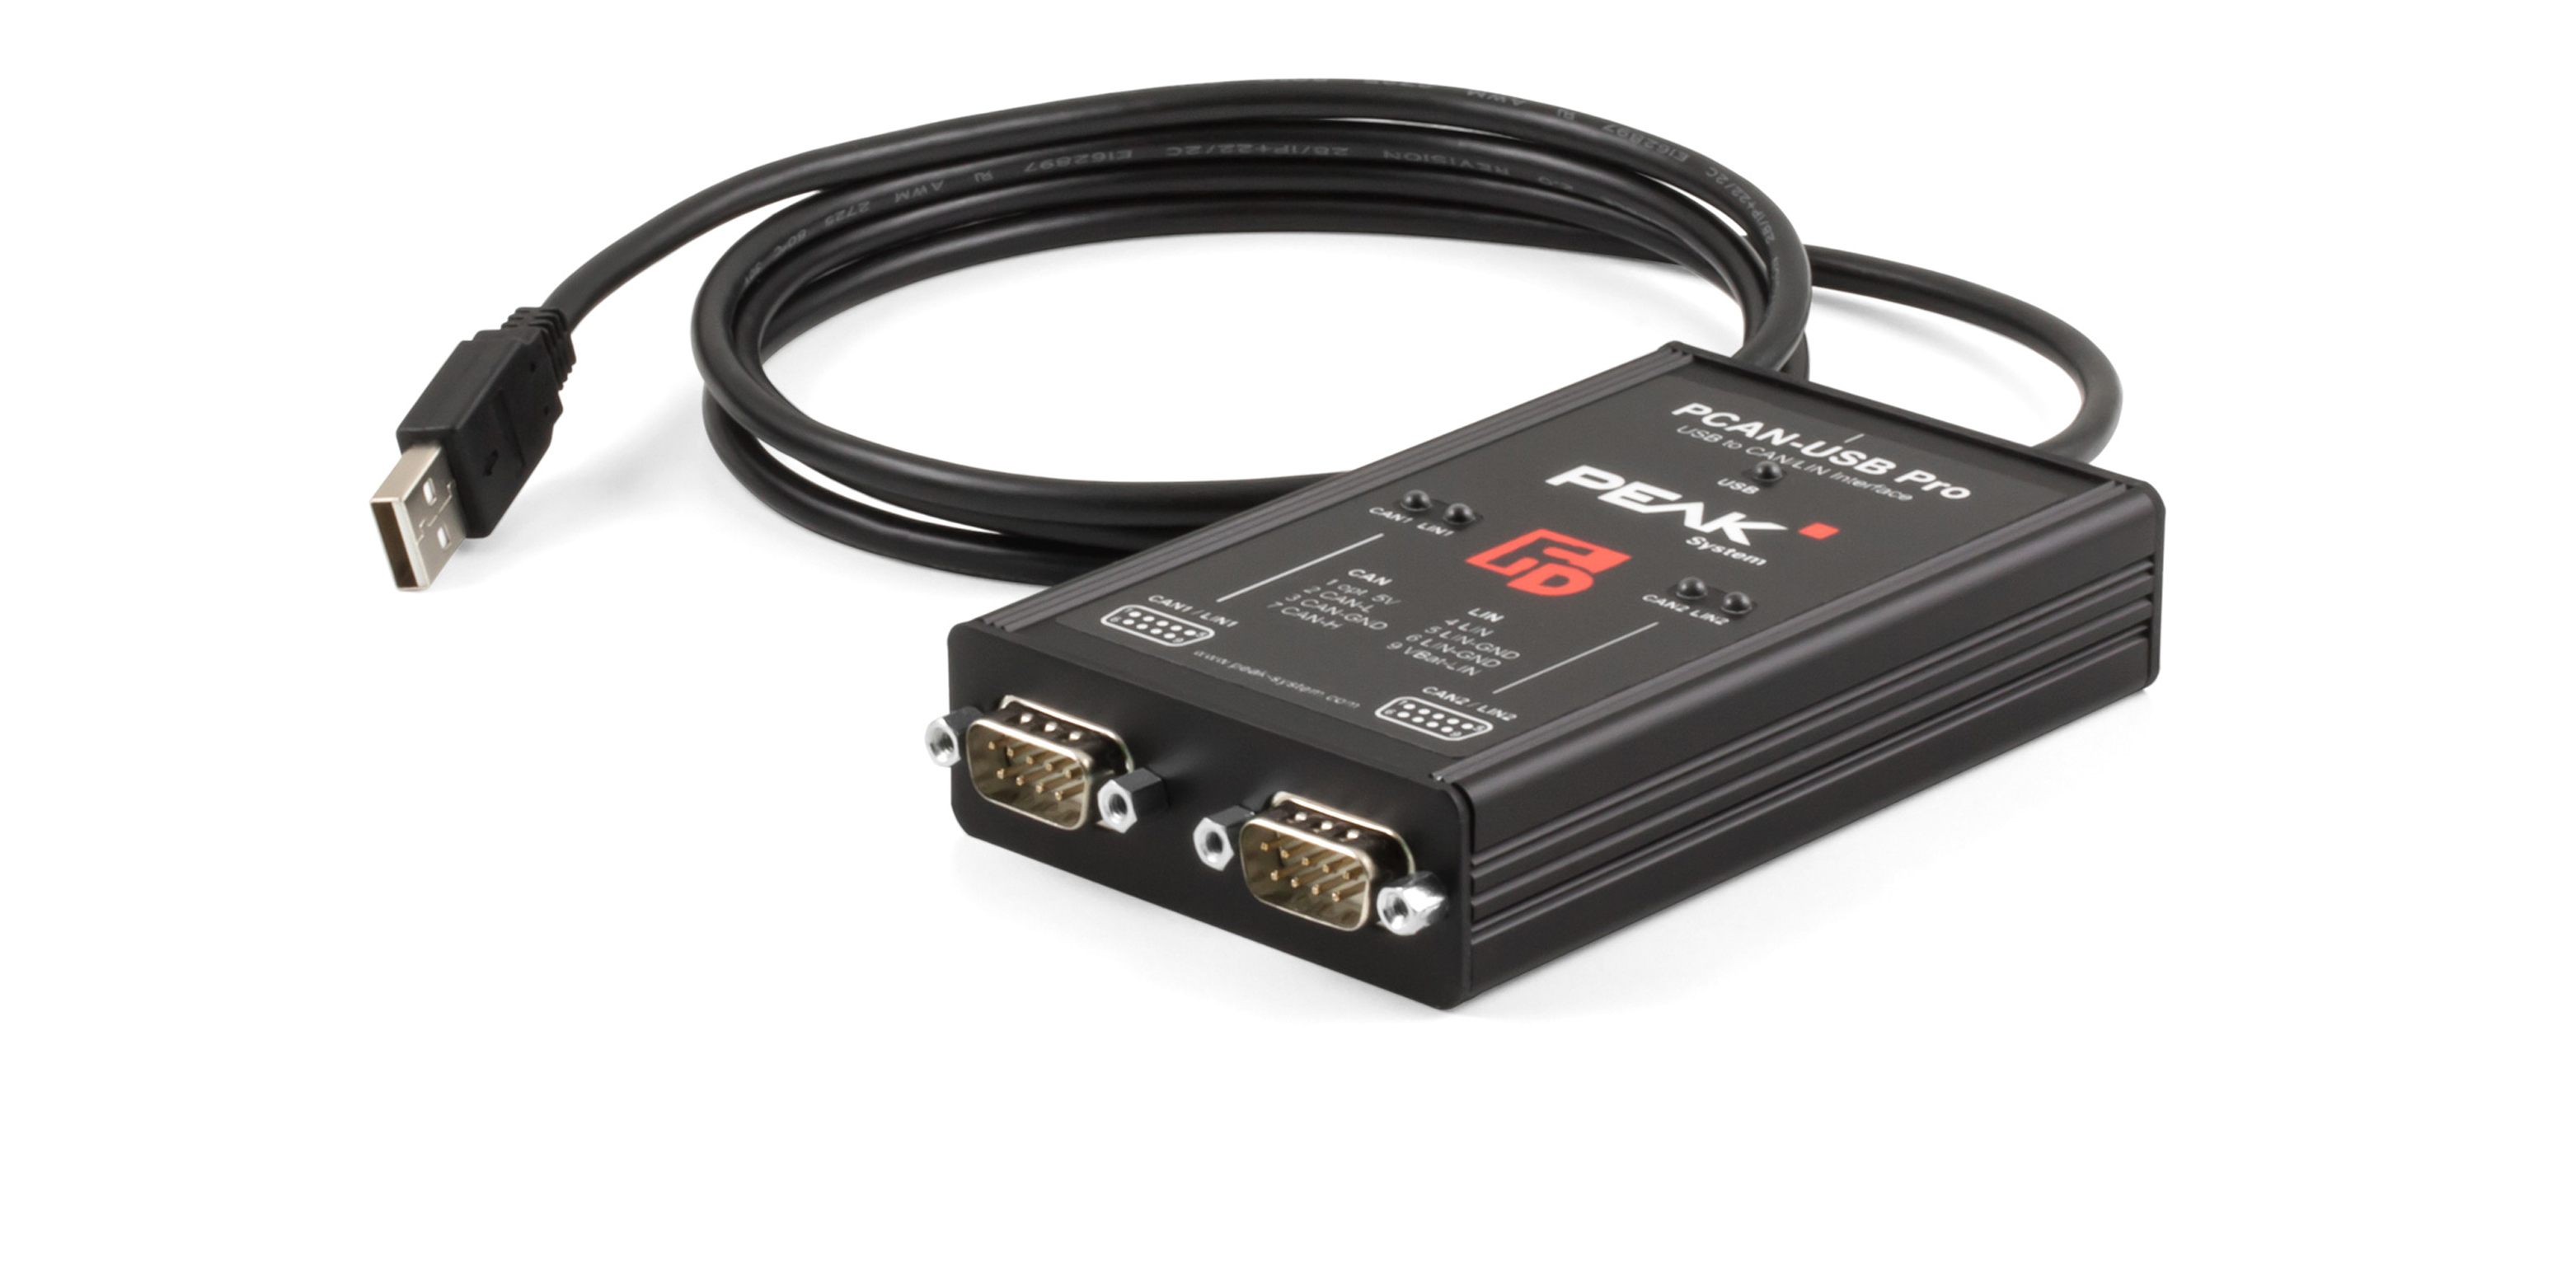 Peak-System CAN FD and LIN Interface for High-Speed USB 2.0 IPEH-004061